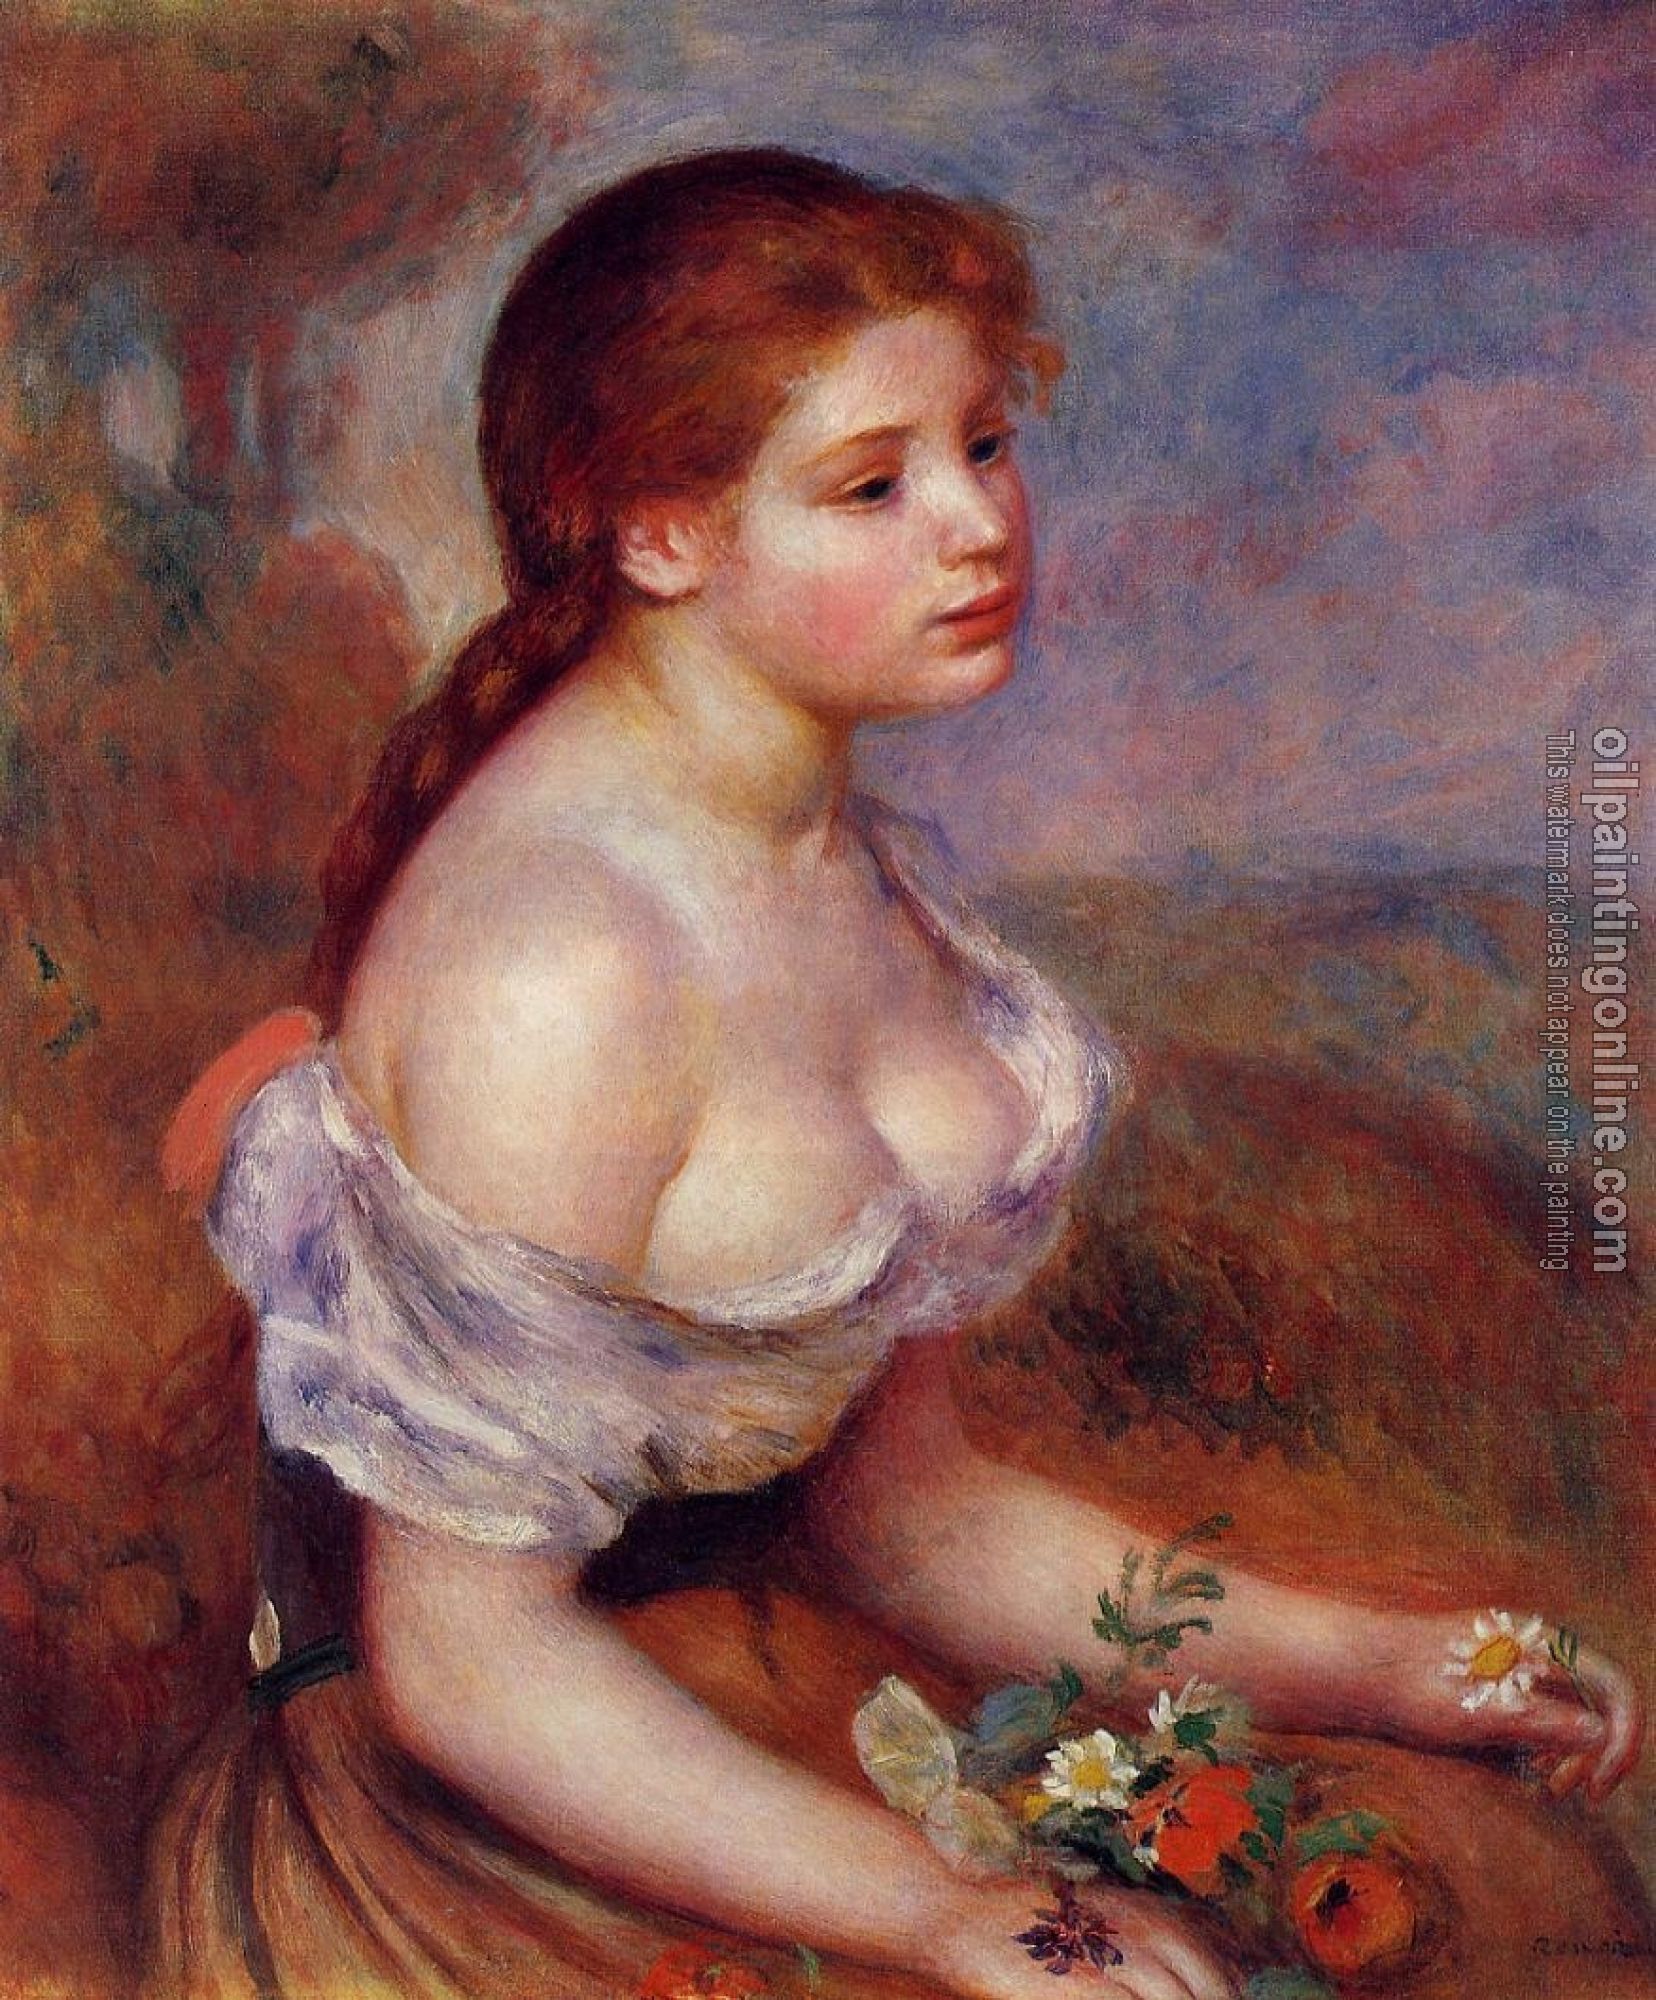 Renoir, Pierre Auguste - Young Girl with Daisies